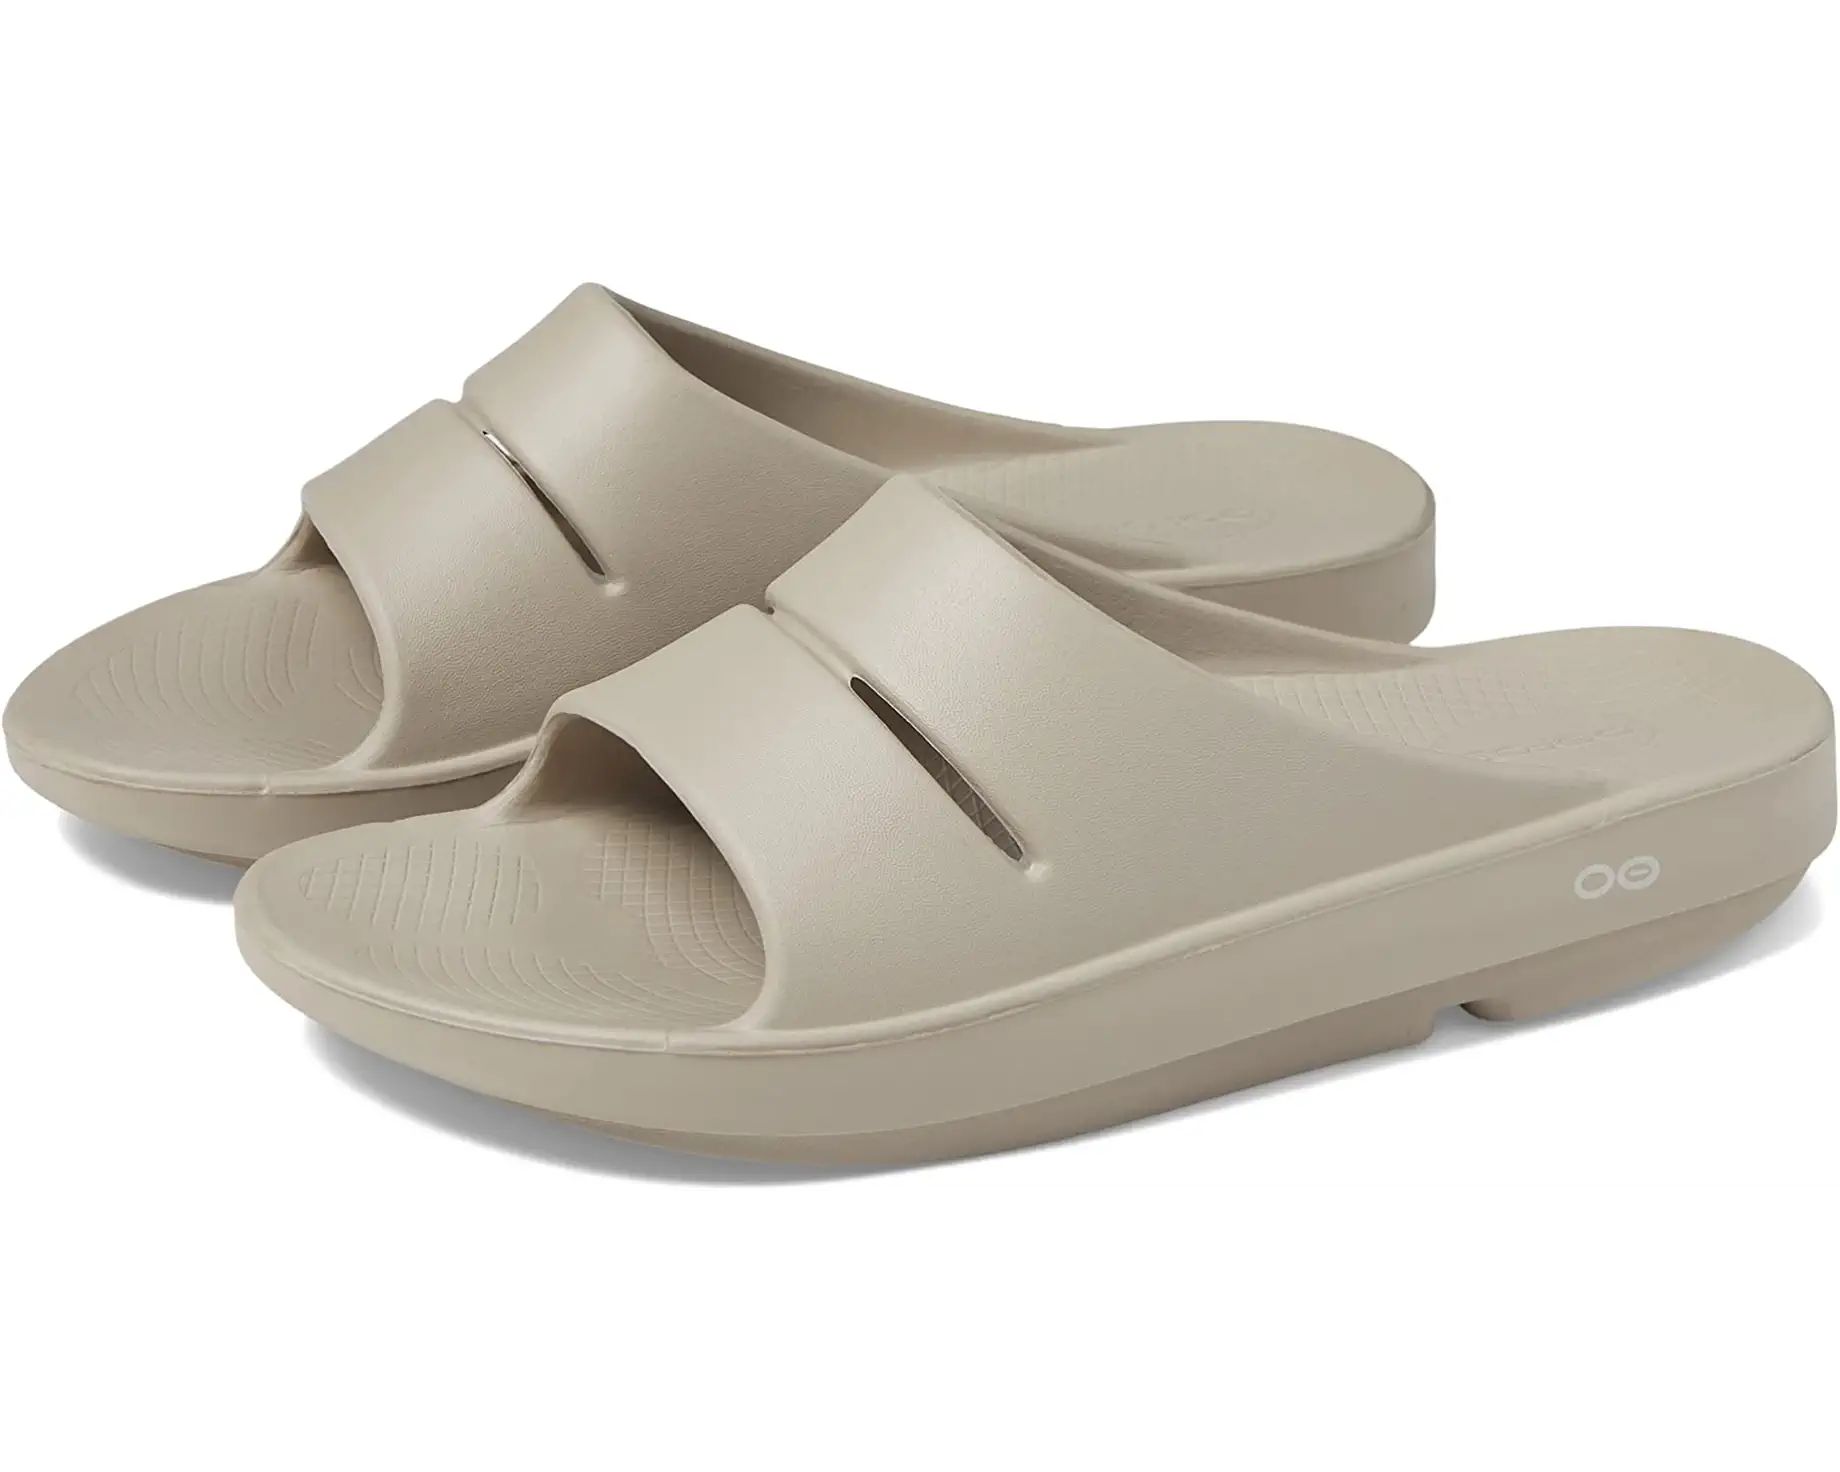 OOFOS OOahh Slide Sandal | Zappos